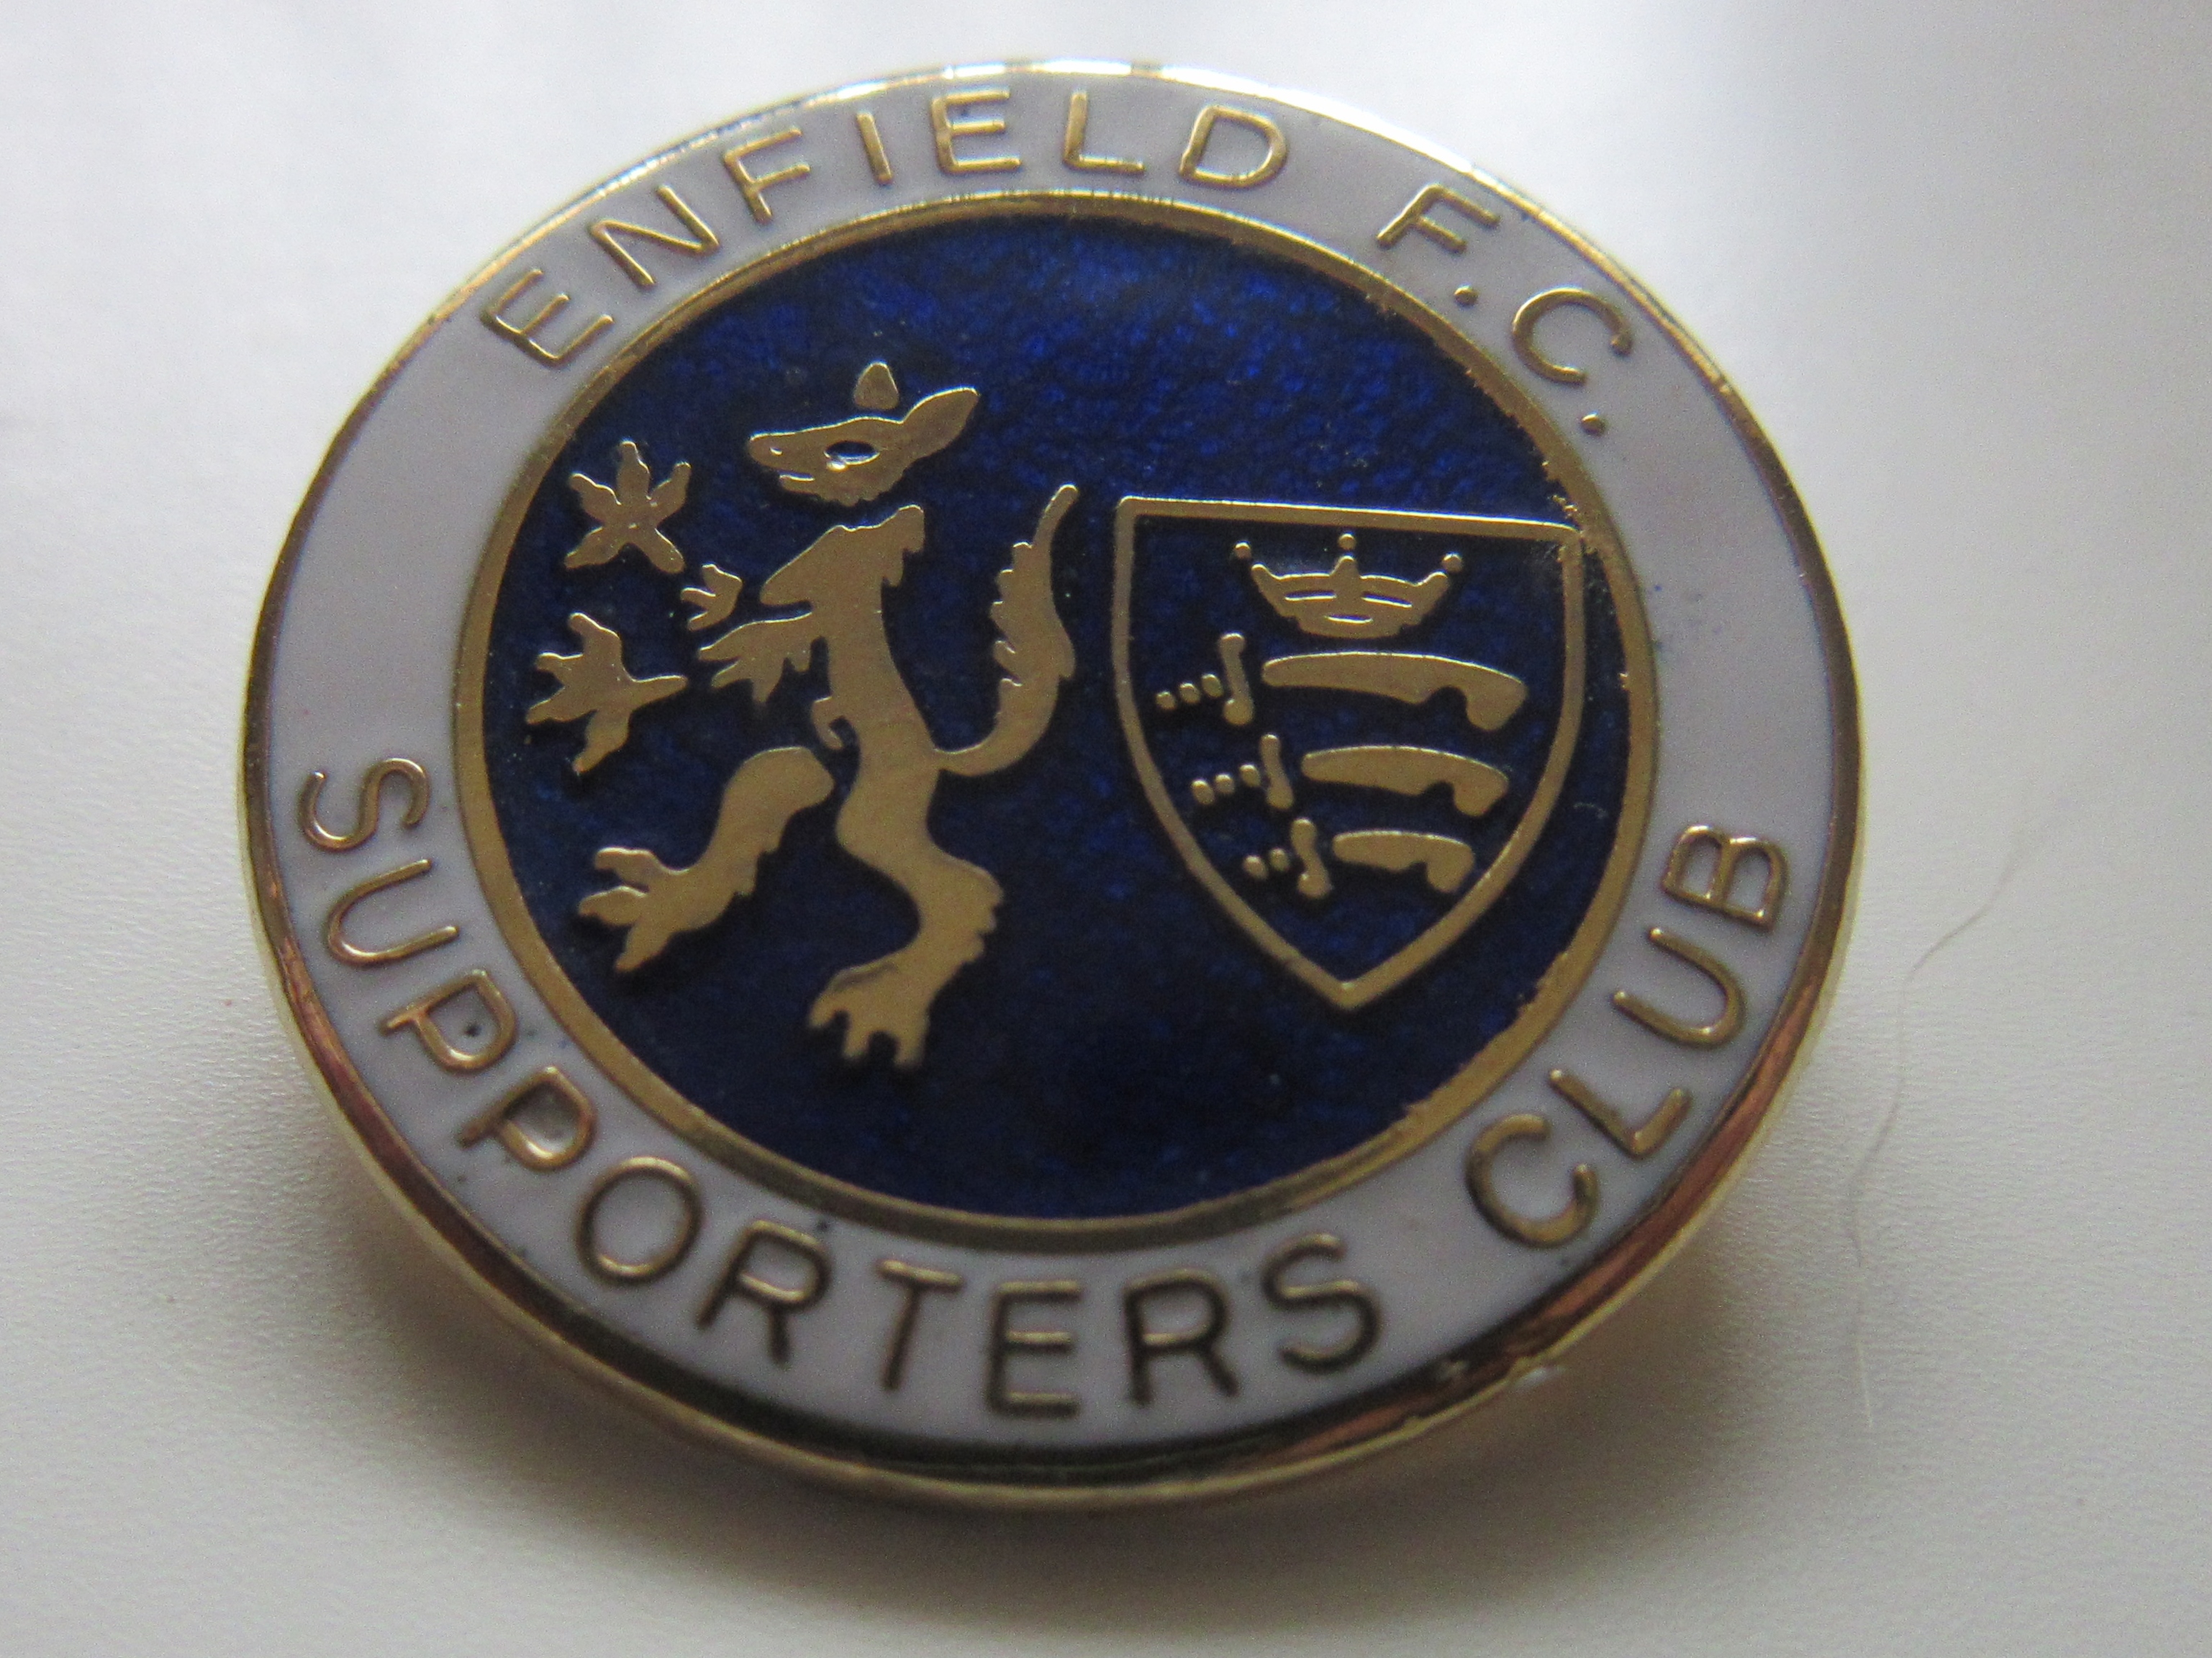 ENFIELD SUPPORTERS CLUB BADGE